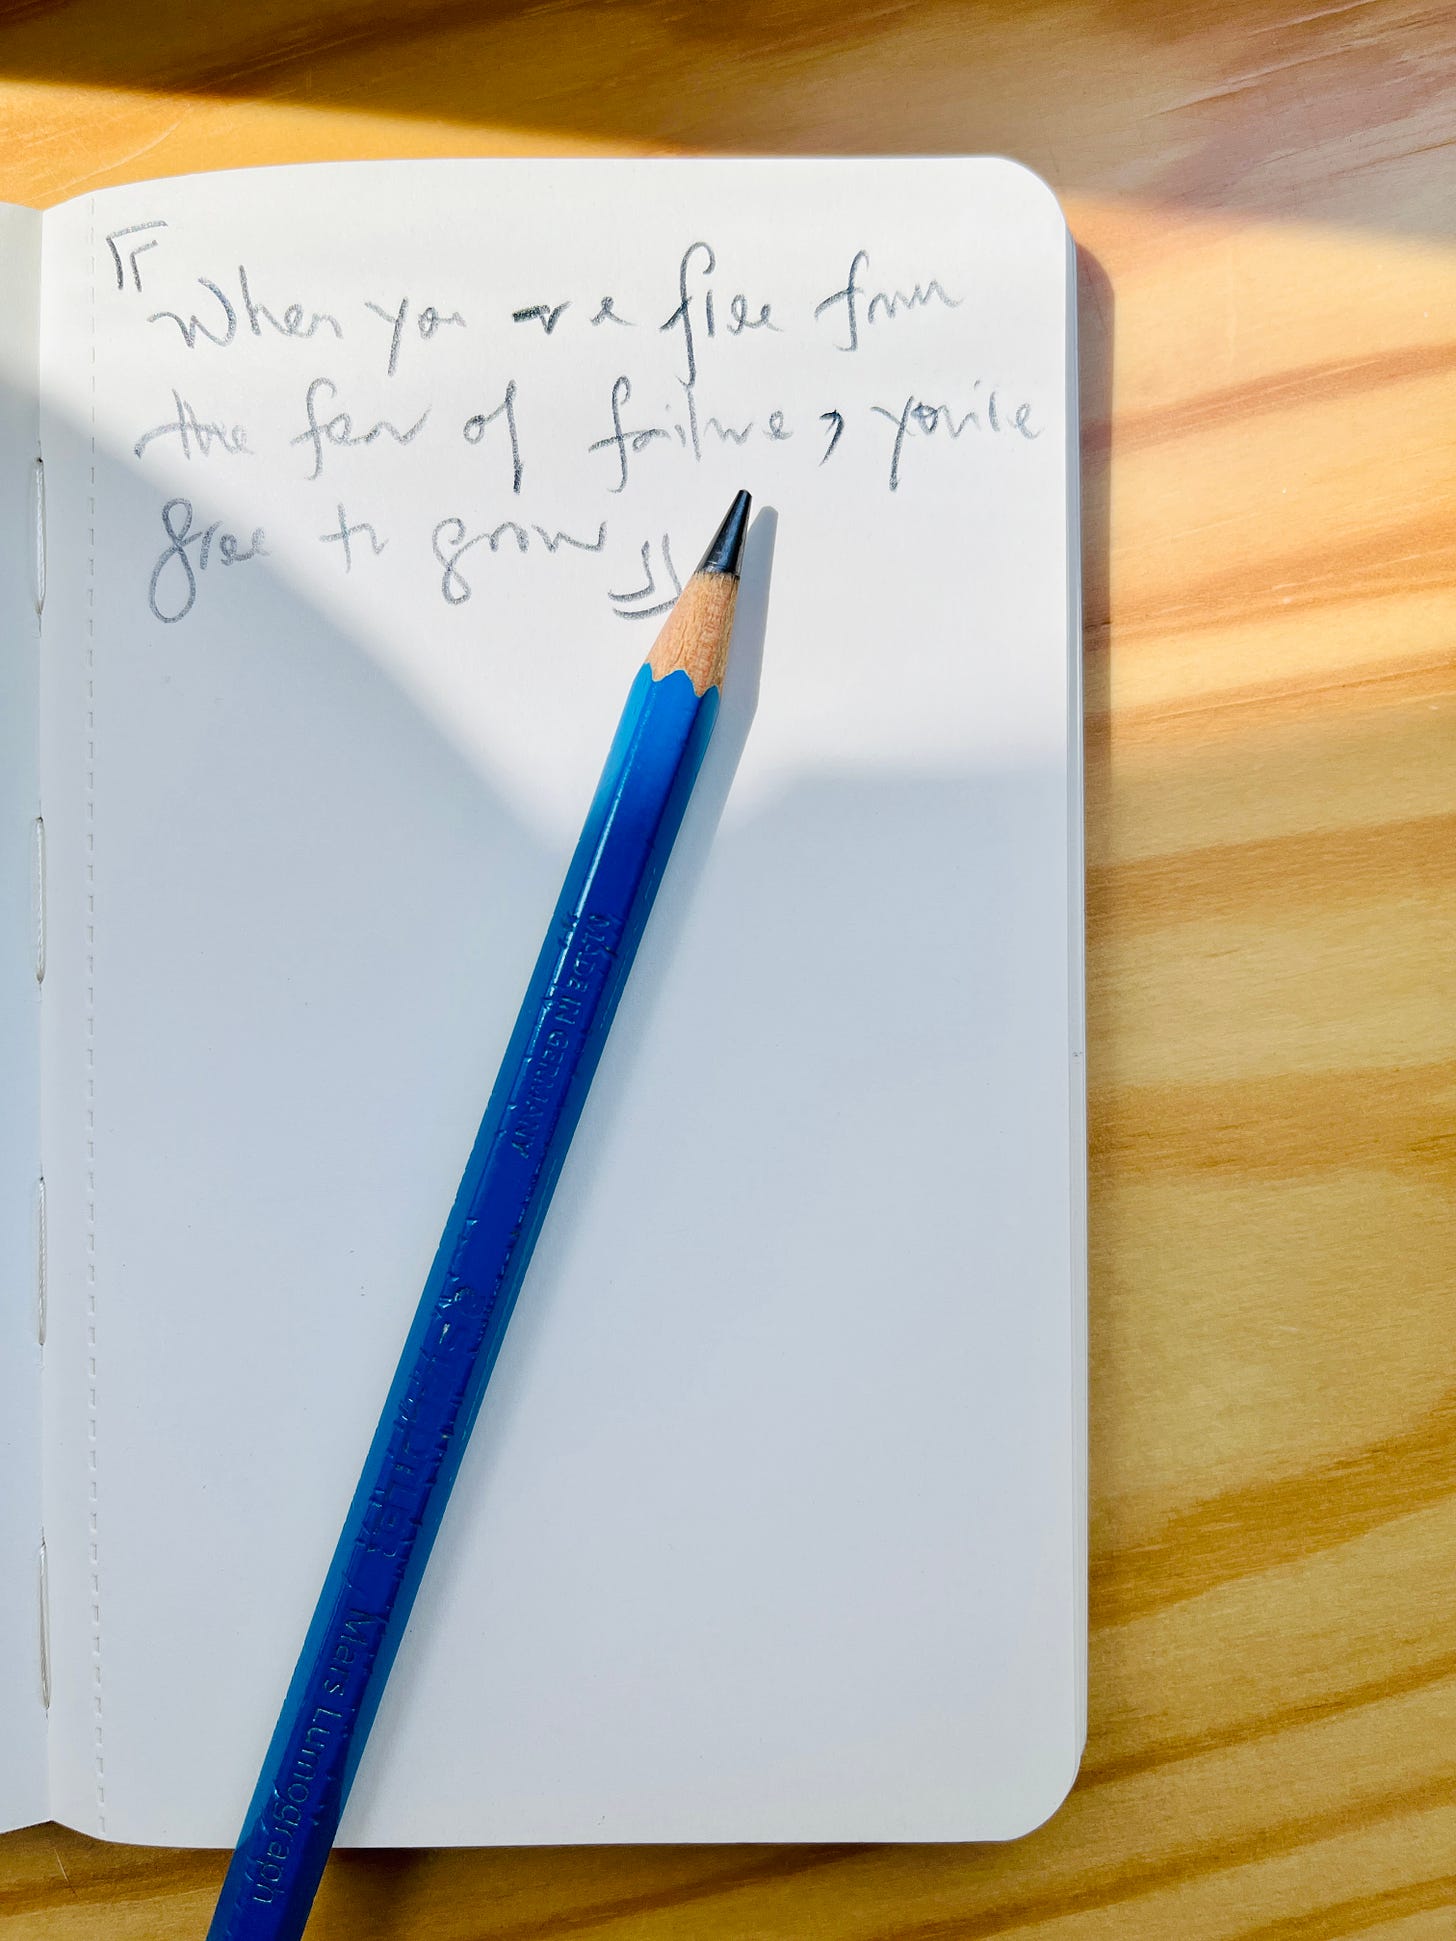 Image: pencil handwritten phrase on a notebook, “When you are free from the fear of failure, you’re free to grow.”